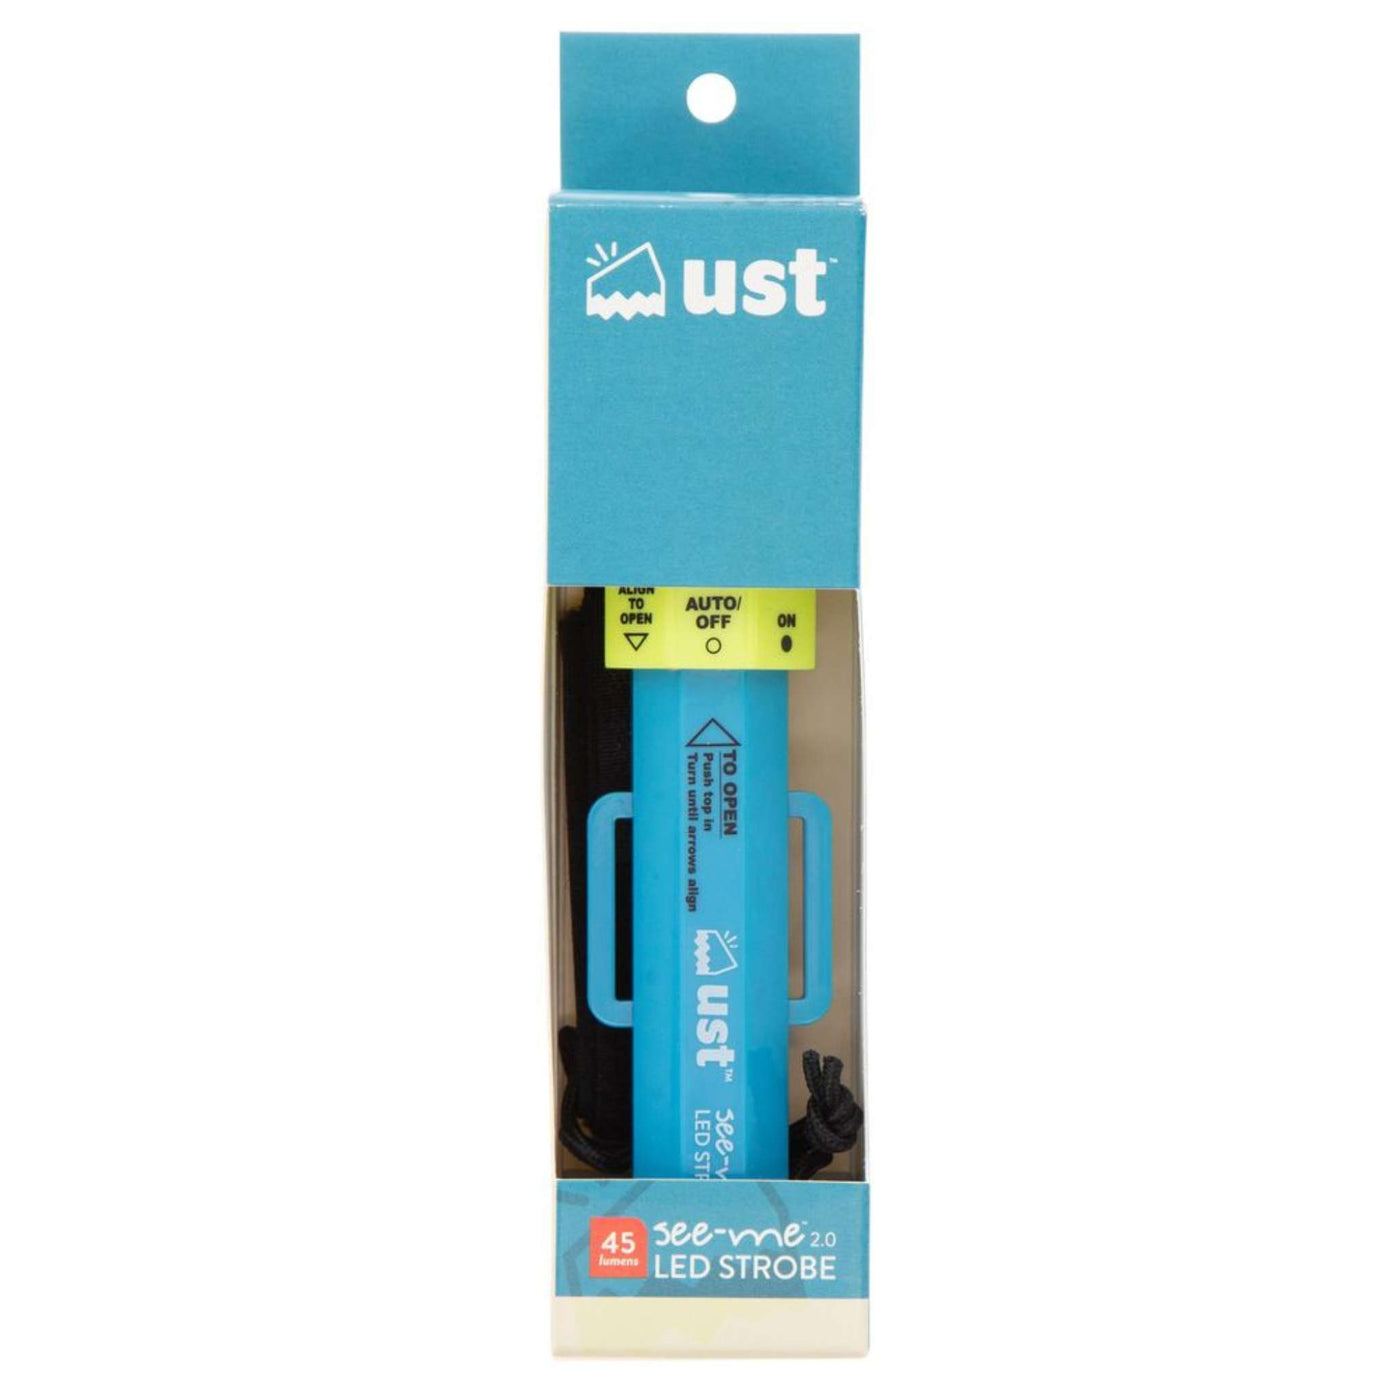 UST LED See-Me 2.0 Strobe Light | Sea Kayaking Safety Gear and Lights | Further Faster Christchurch NZ